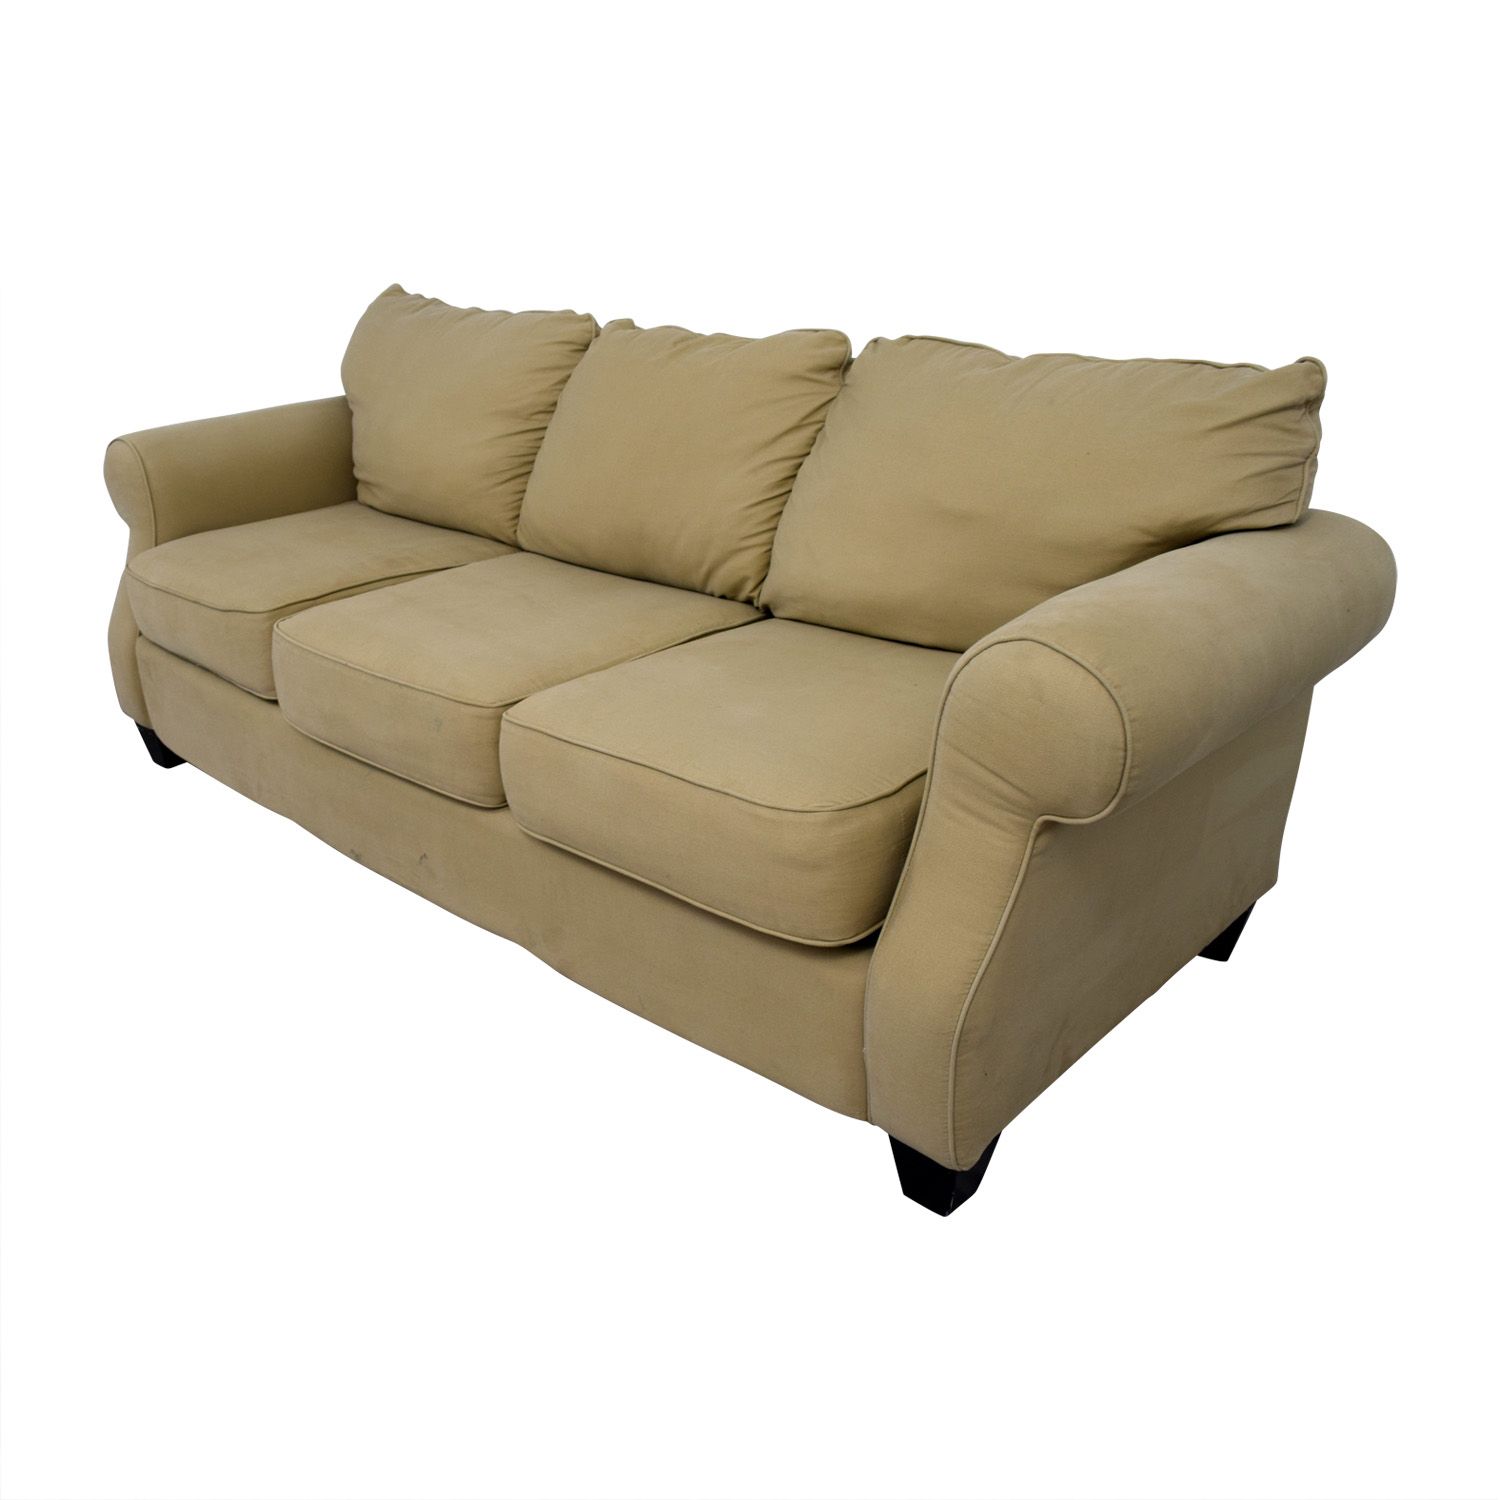 90% Off – Beige Three Cushion Curved Arm Sofa / Sofas Regarding Sofas With Curved Arms (View 8 of 20)